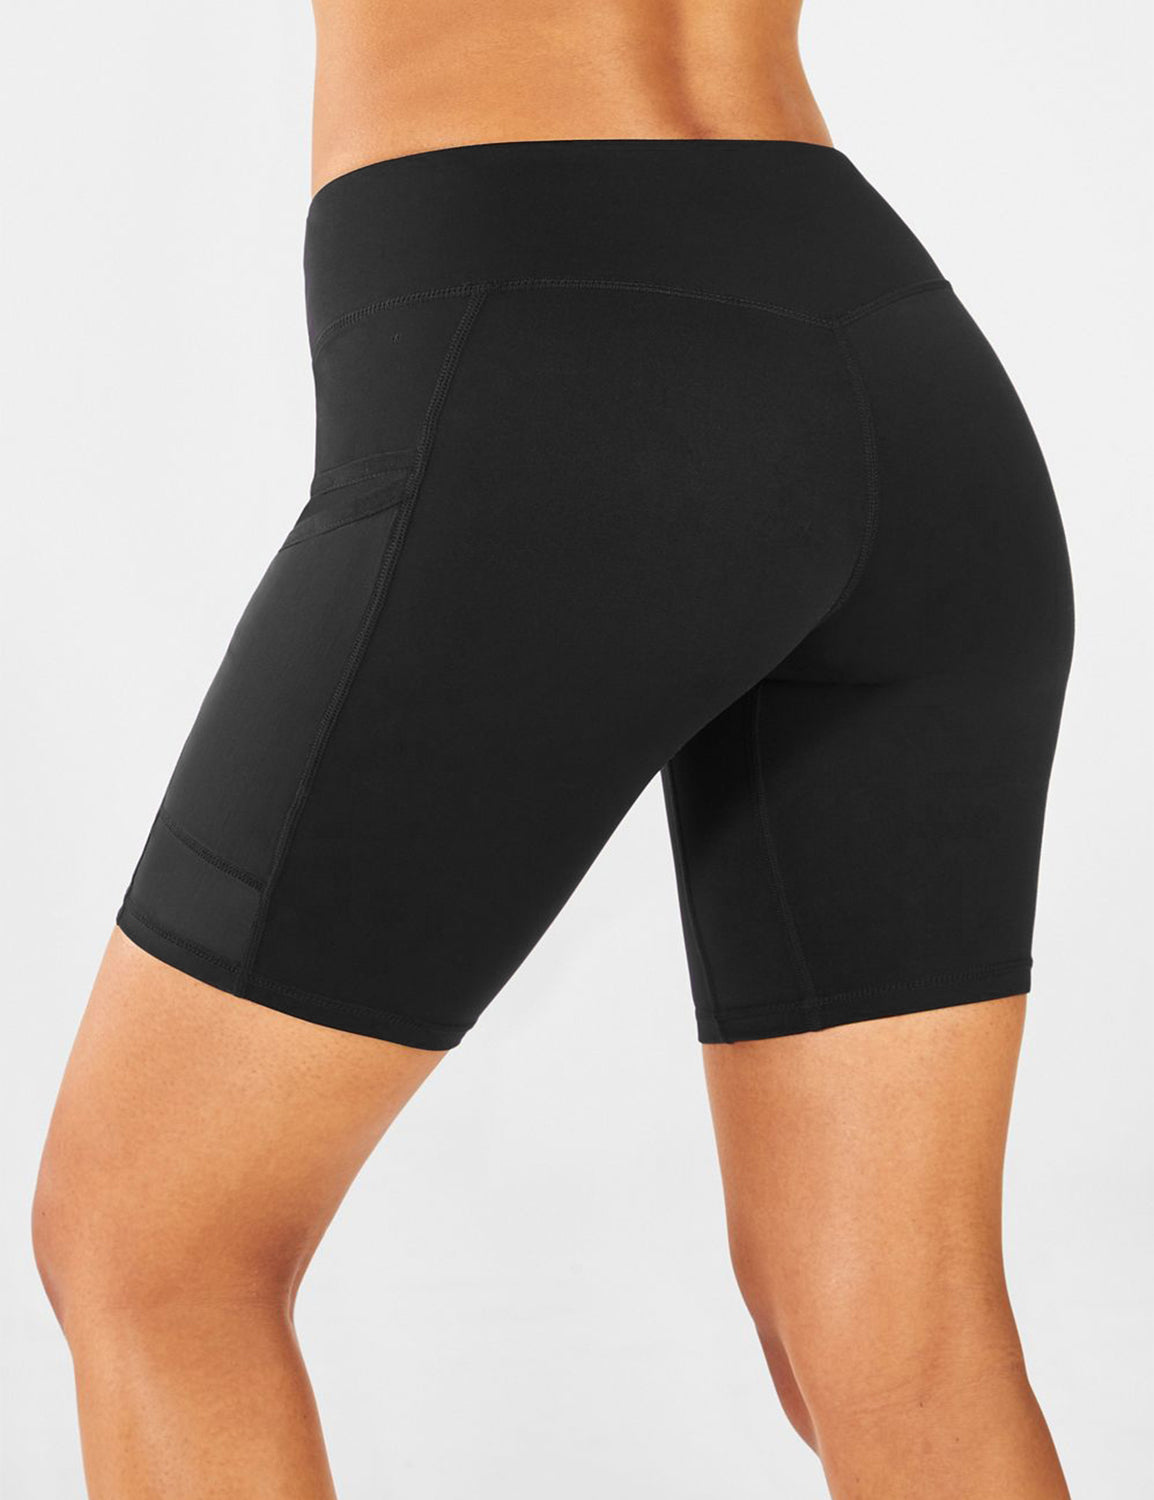 Blooming Jelly_High Elasticity Side Pockets Biker Shorts_Black_254001_02_Women Athletic High Elascity Workout_Bottoms_Shorts